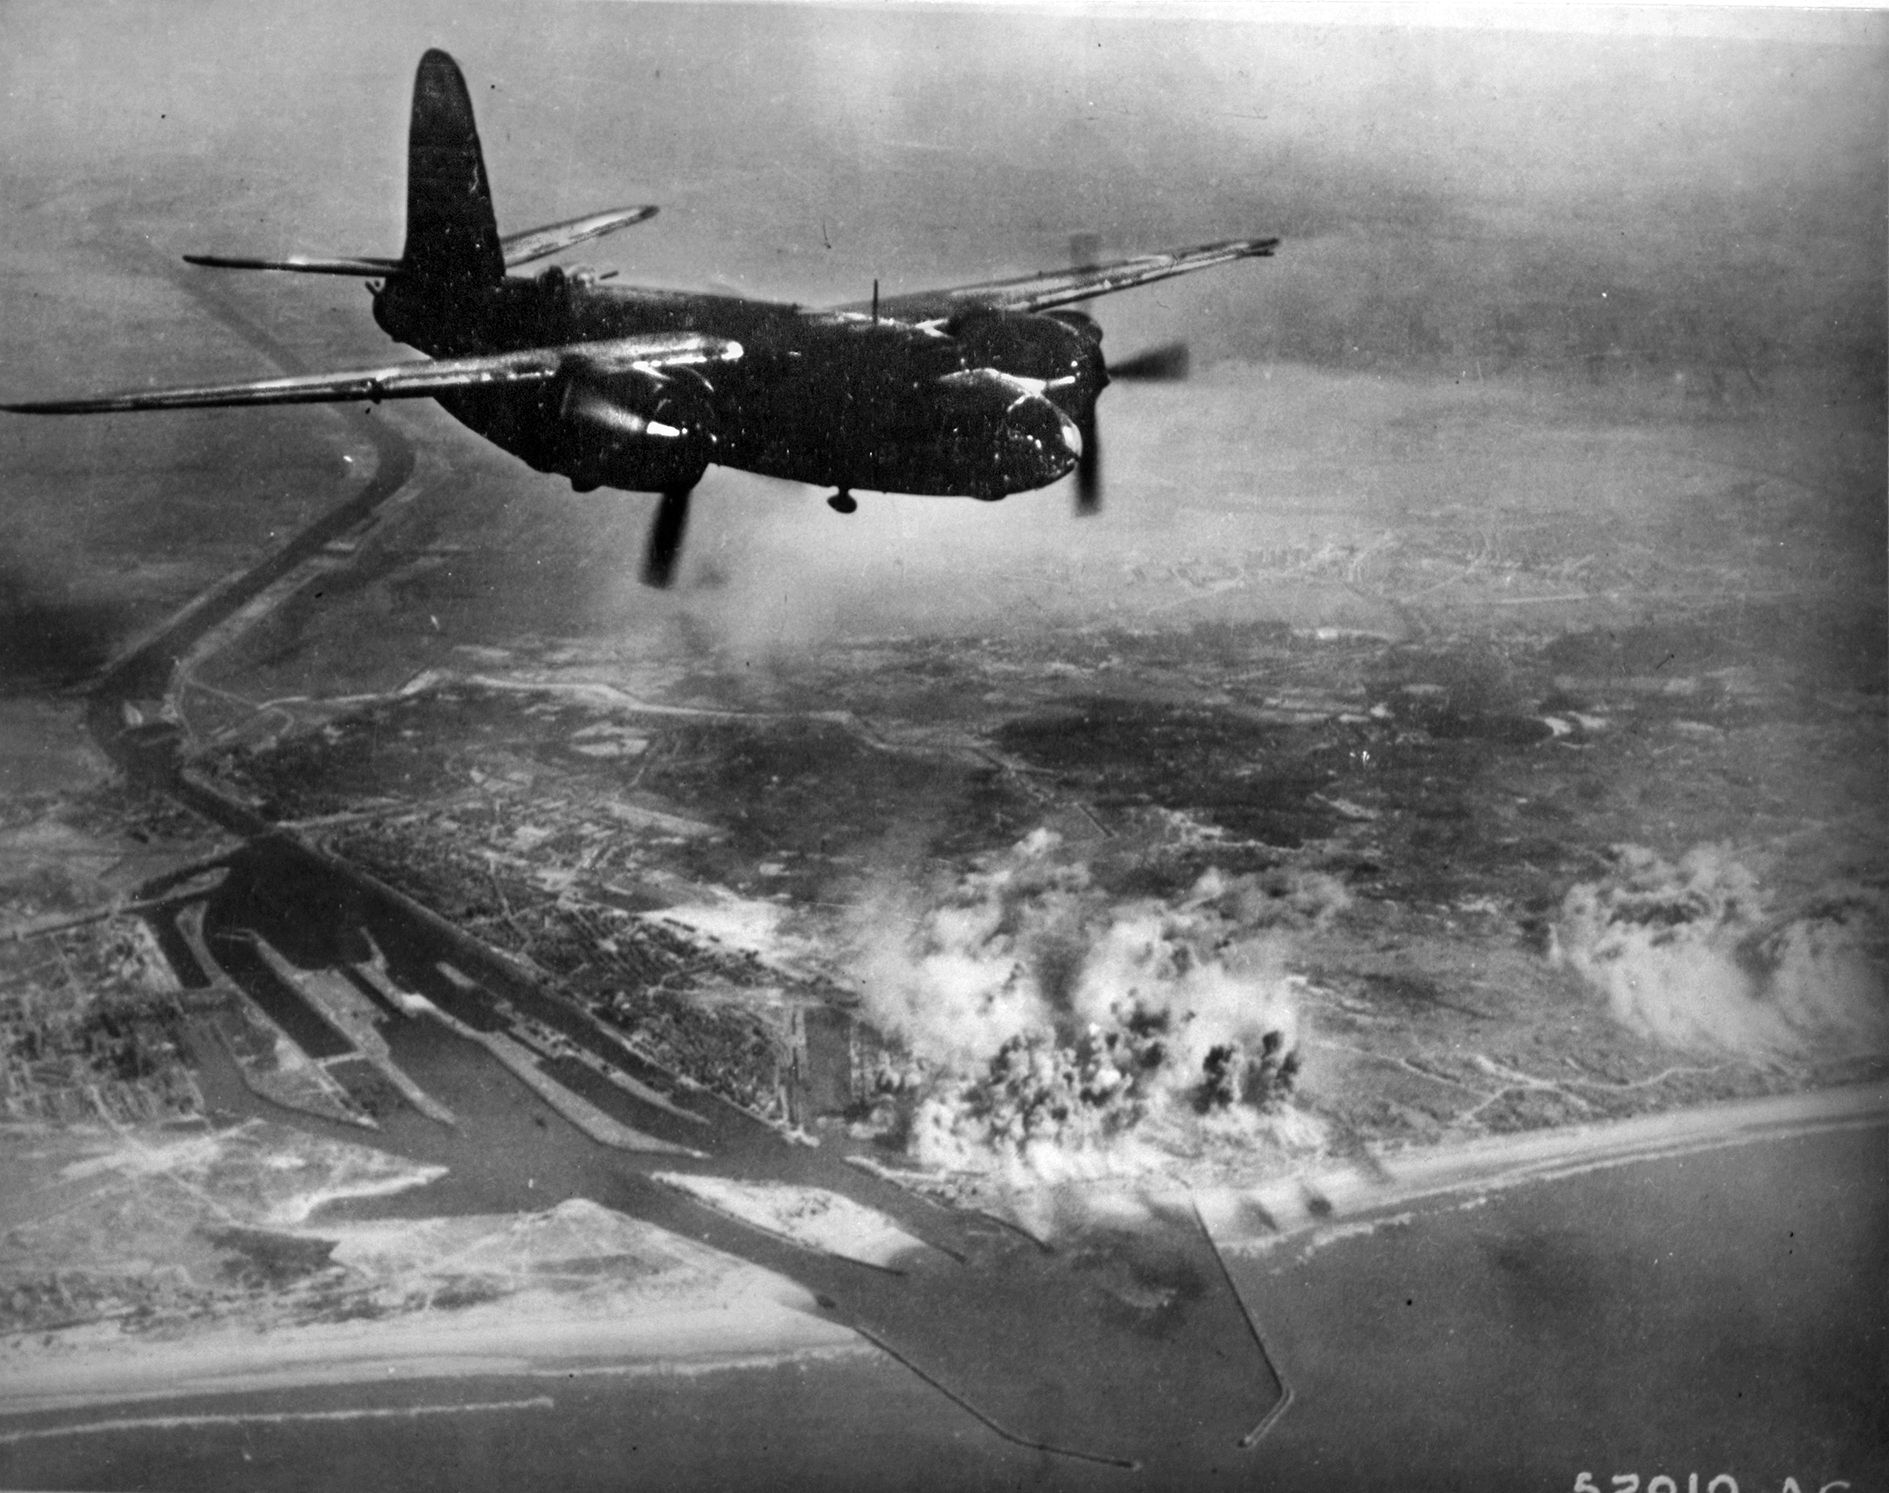 After the failure of the IJmuiden raids, B-26s were used in medium-altitude missions. Here, a B-26 named “Son of Satan” flies above E-boat pens in Holland that have just been bombed.